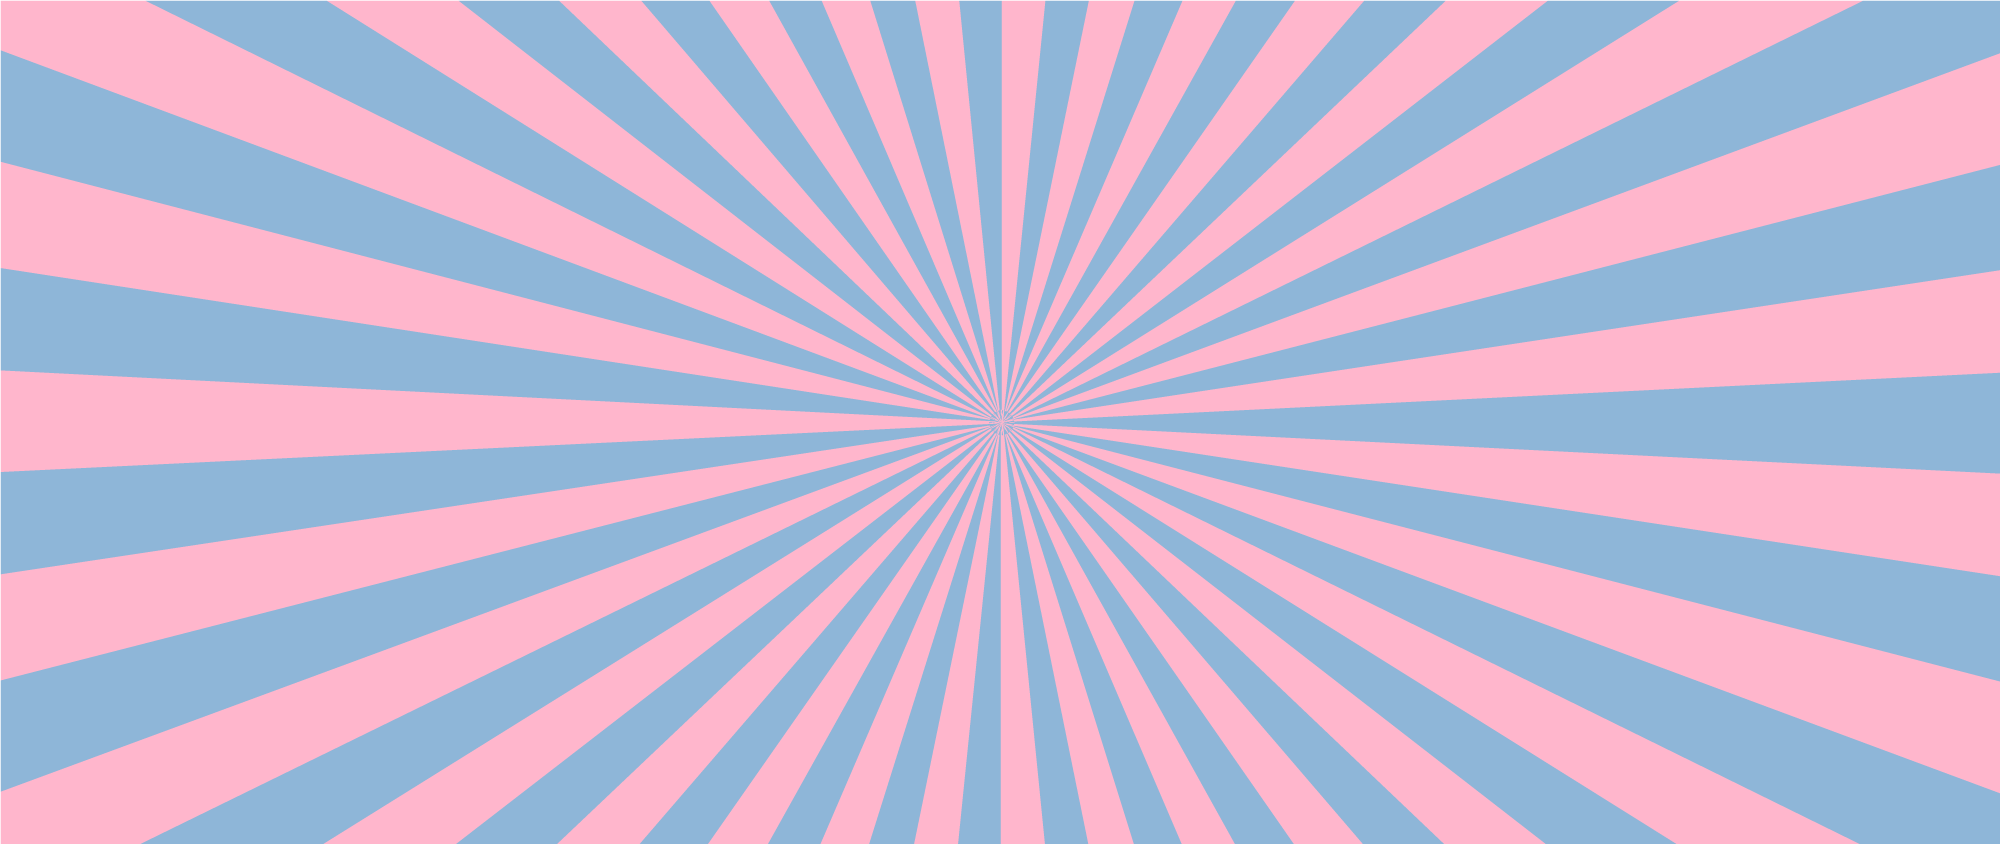 Blue and pink lines converging in the center of the page